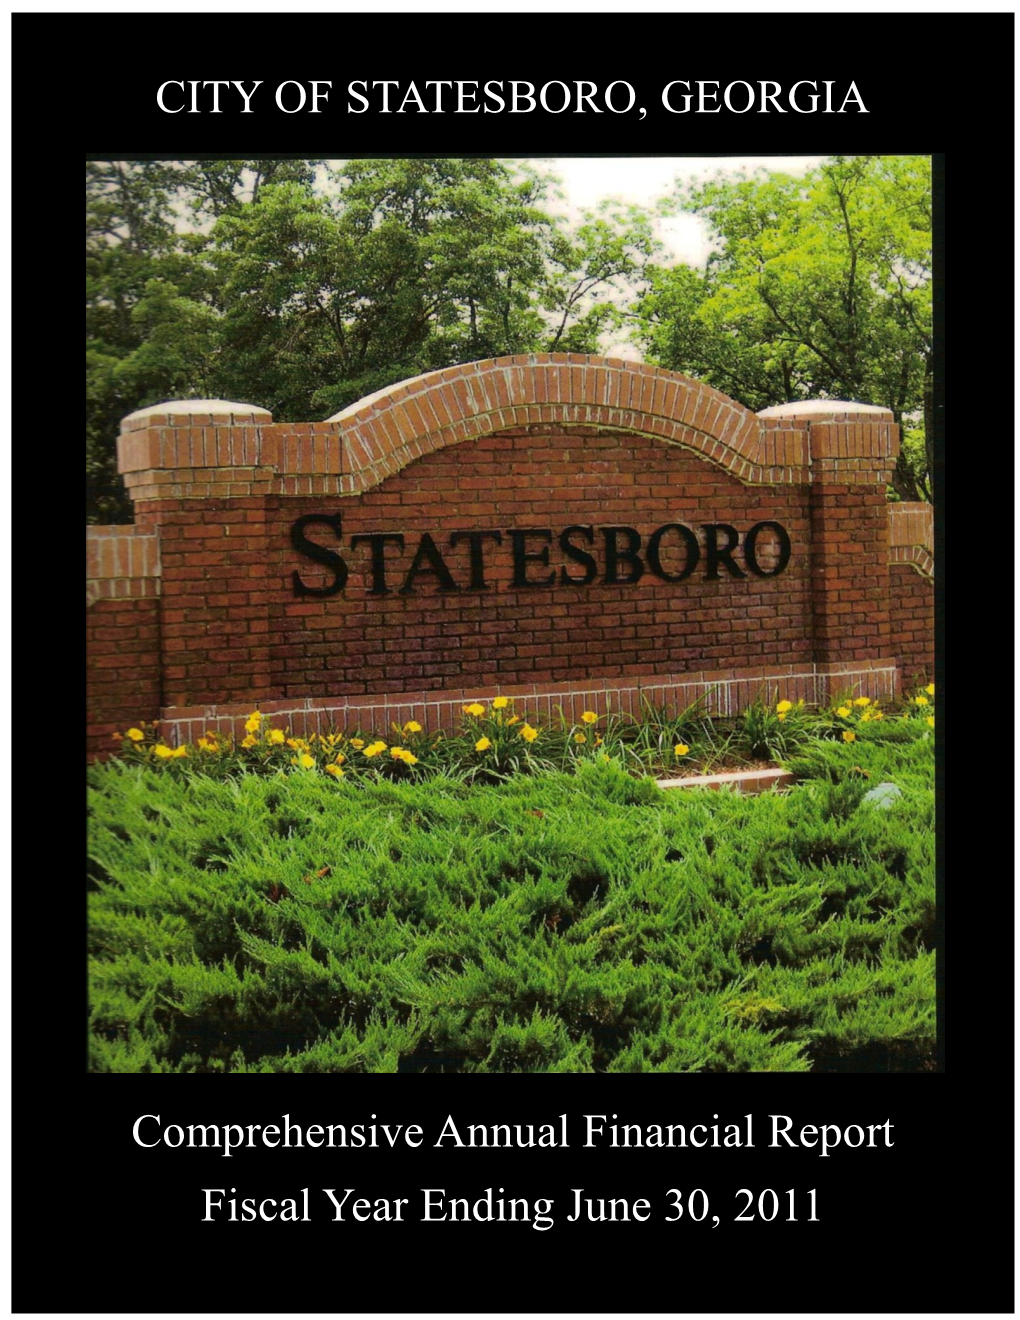 City of Statesboro, Georgia Comprehensive Annual Financial Report for the Year Ended June 30, 2011